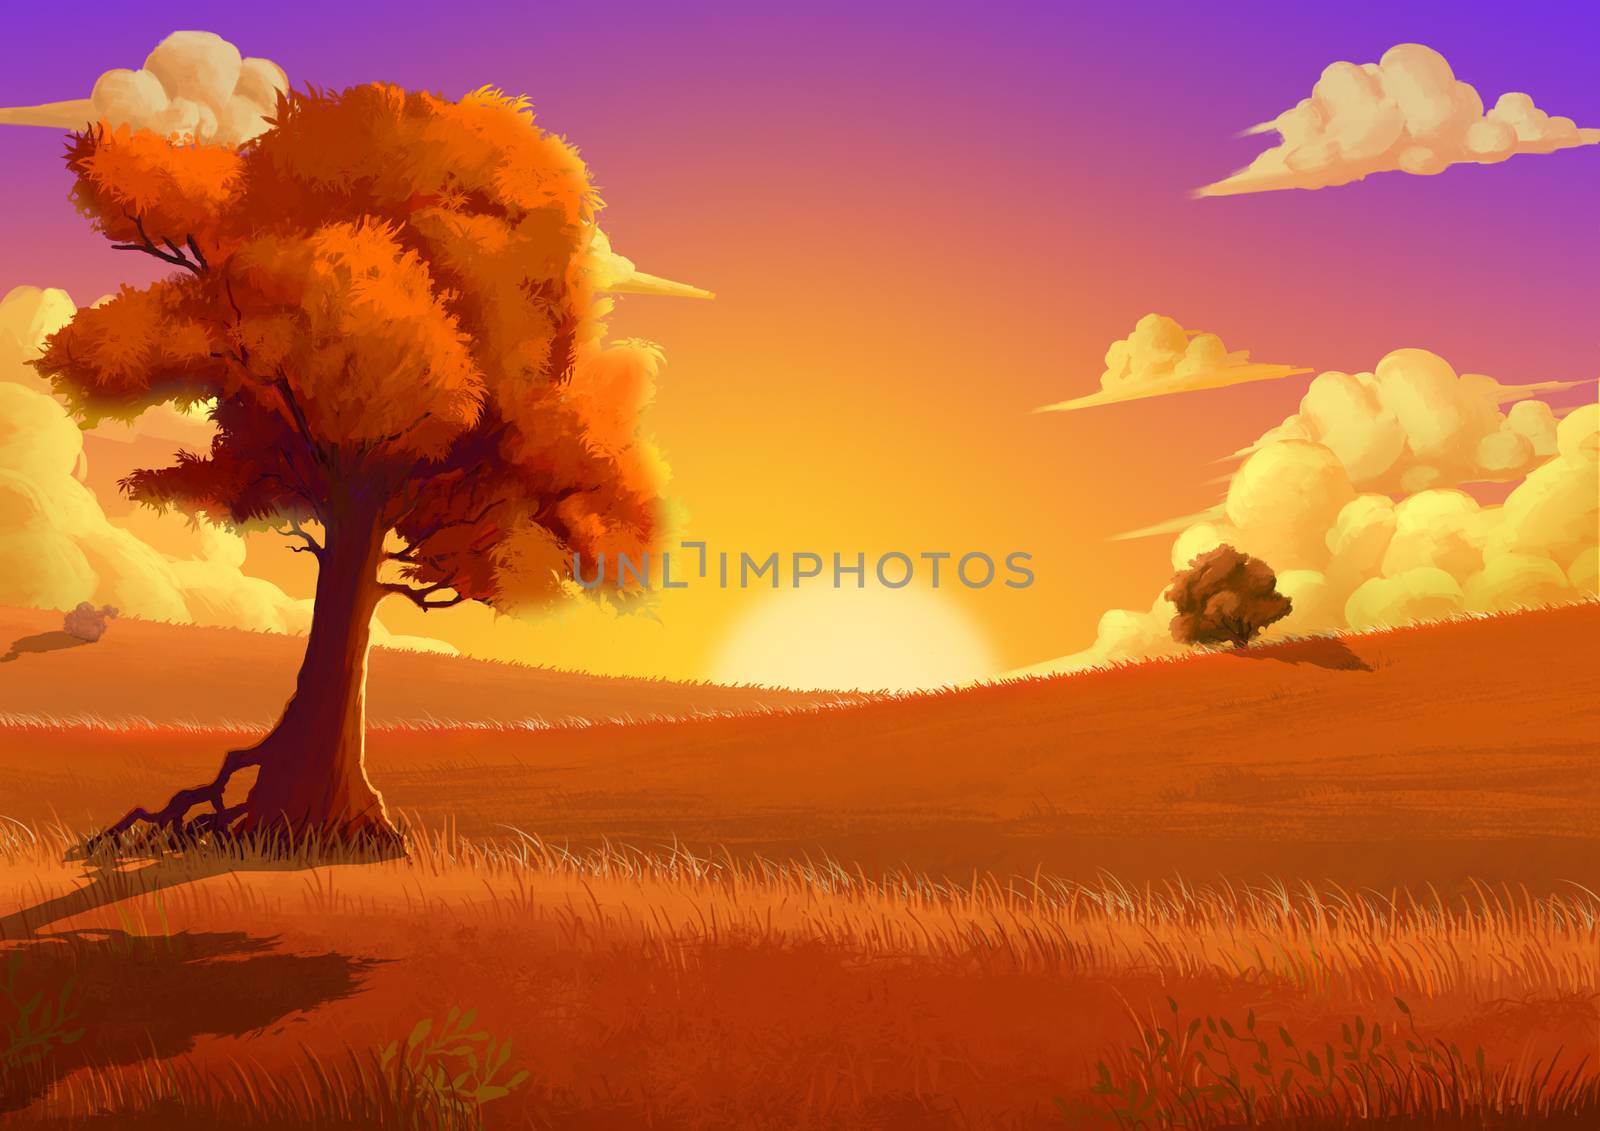 Illustration: The Autumn. Fantastic Cartoon Style Scene Wallpaper Background Design with Story.







Illustration: The Autumn. Fantastic Cartoon Style Scene Wallpaper Background Design with Story.